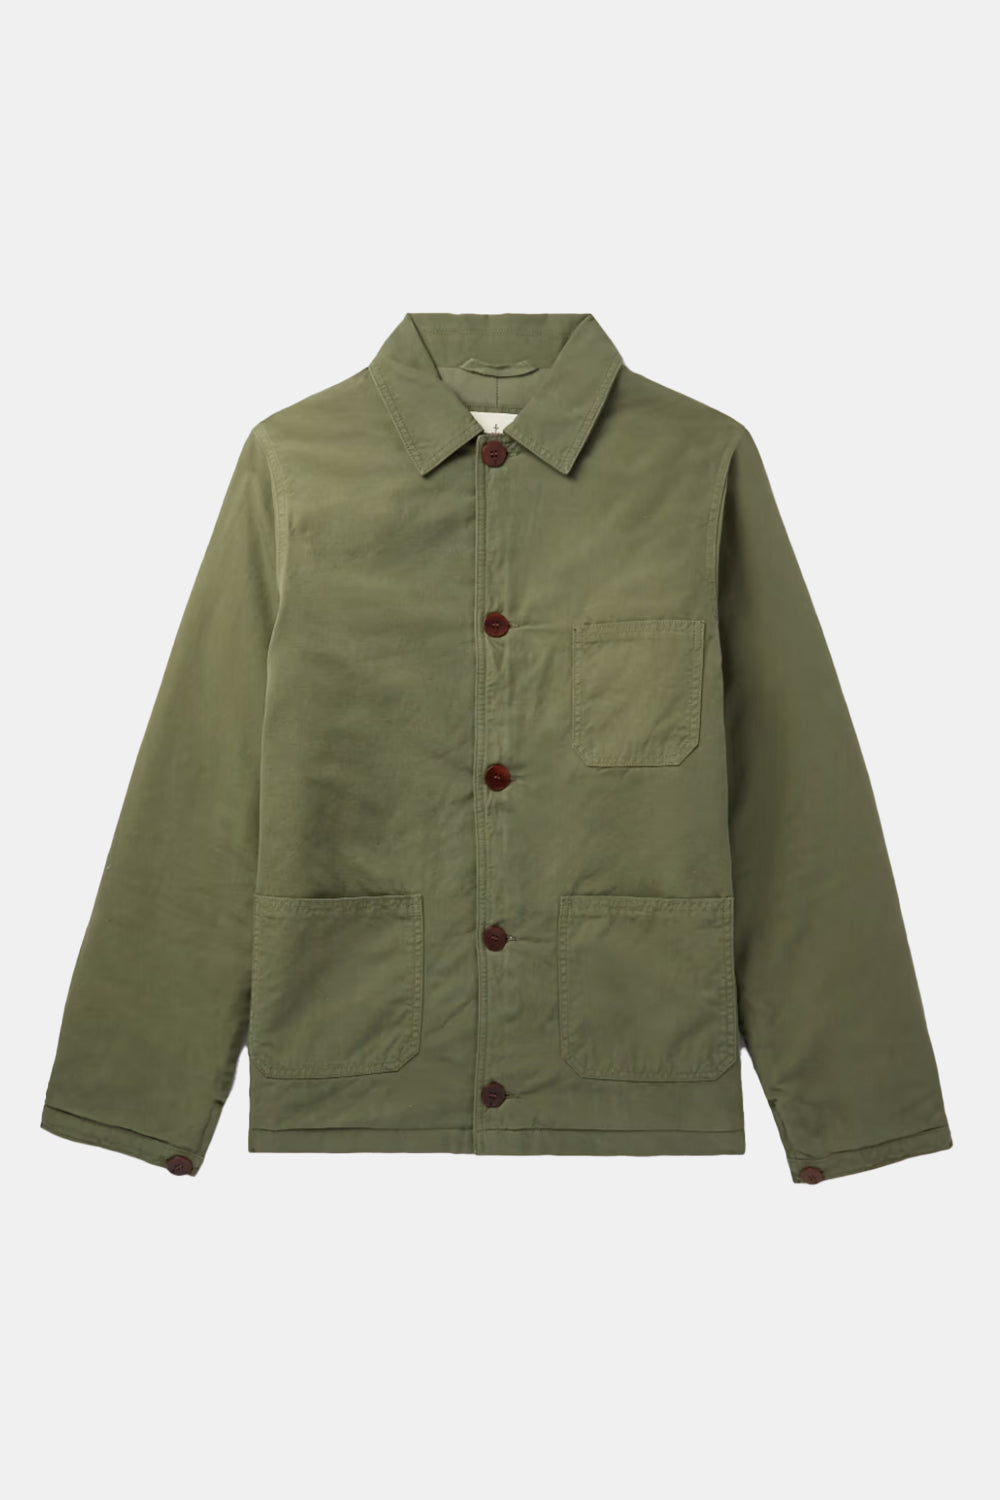 La Paz Baptista Padded Worker Jacket (Military Green Canvas) | Number Six